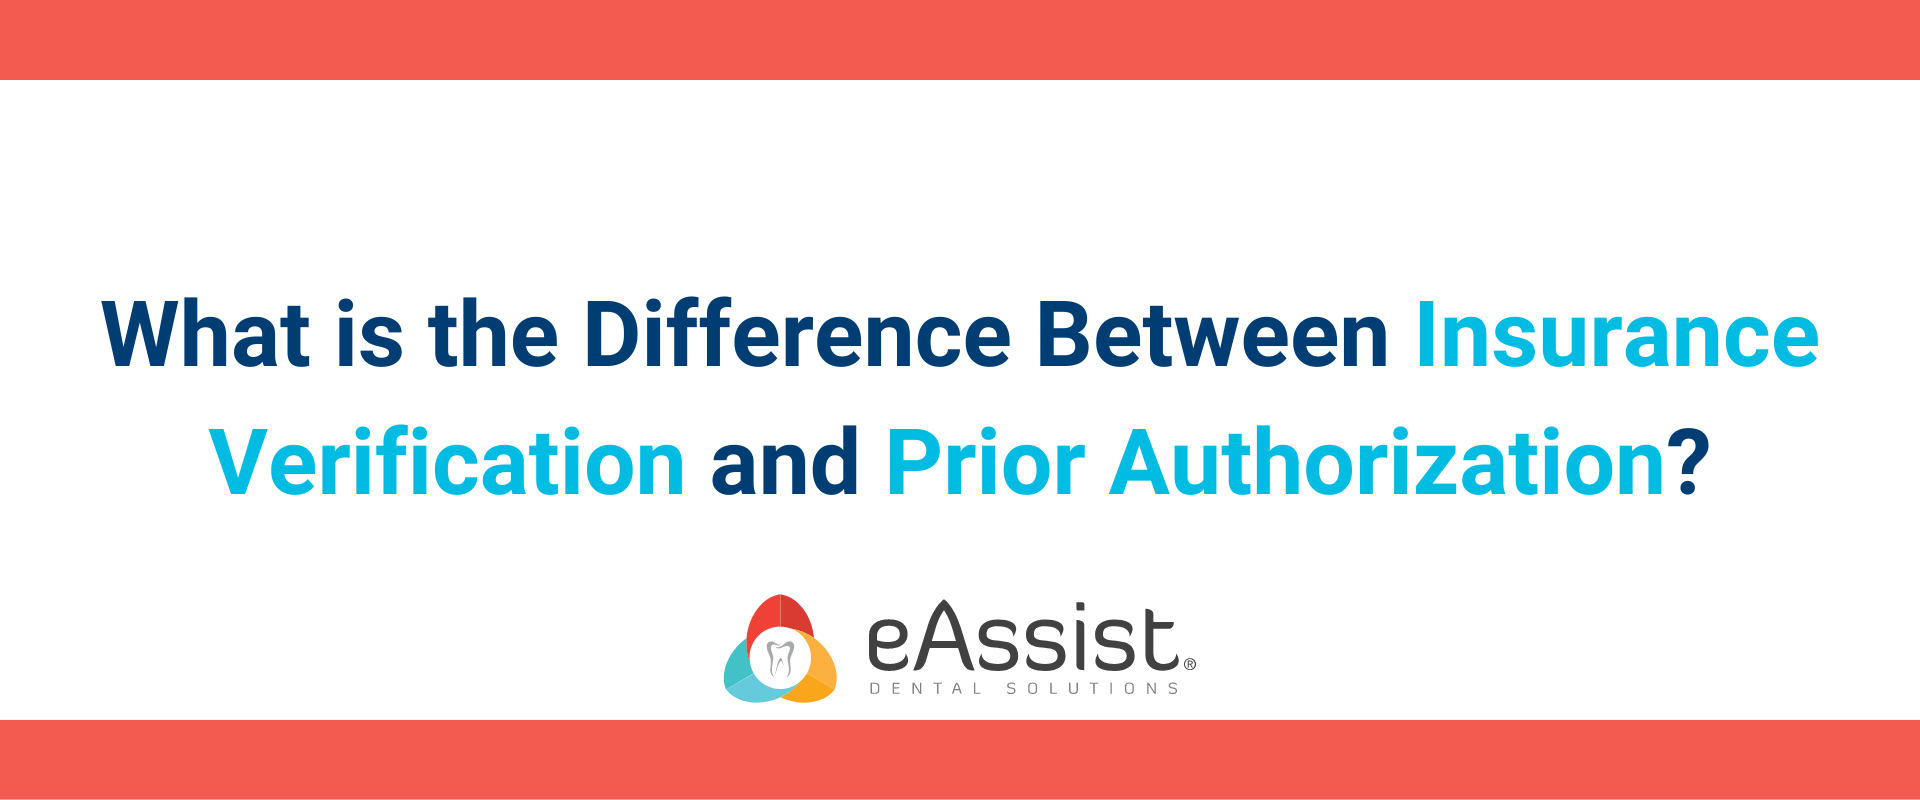 What is the Difference Between Insurance Verification and Prior Authorization